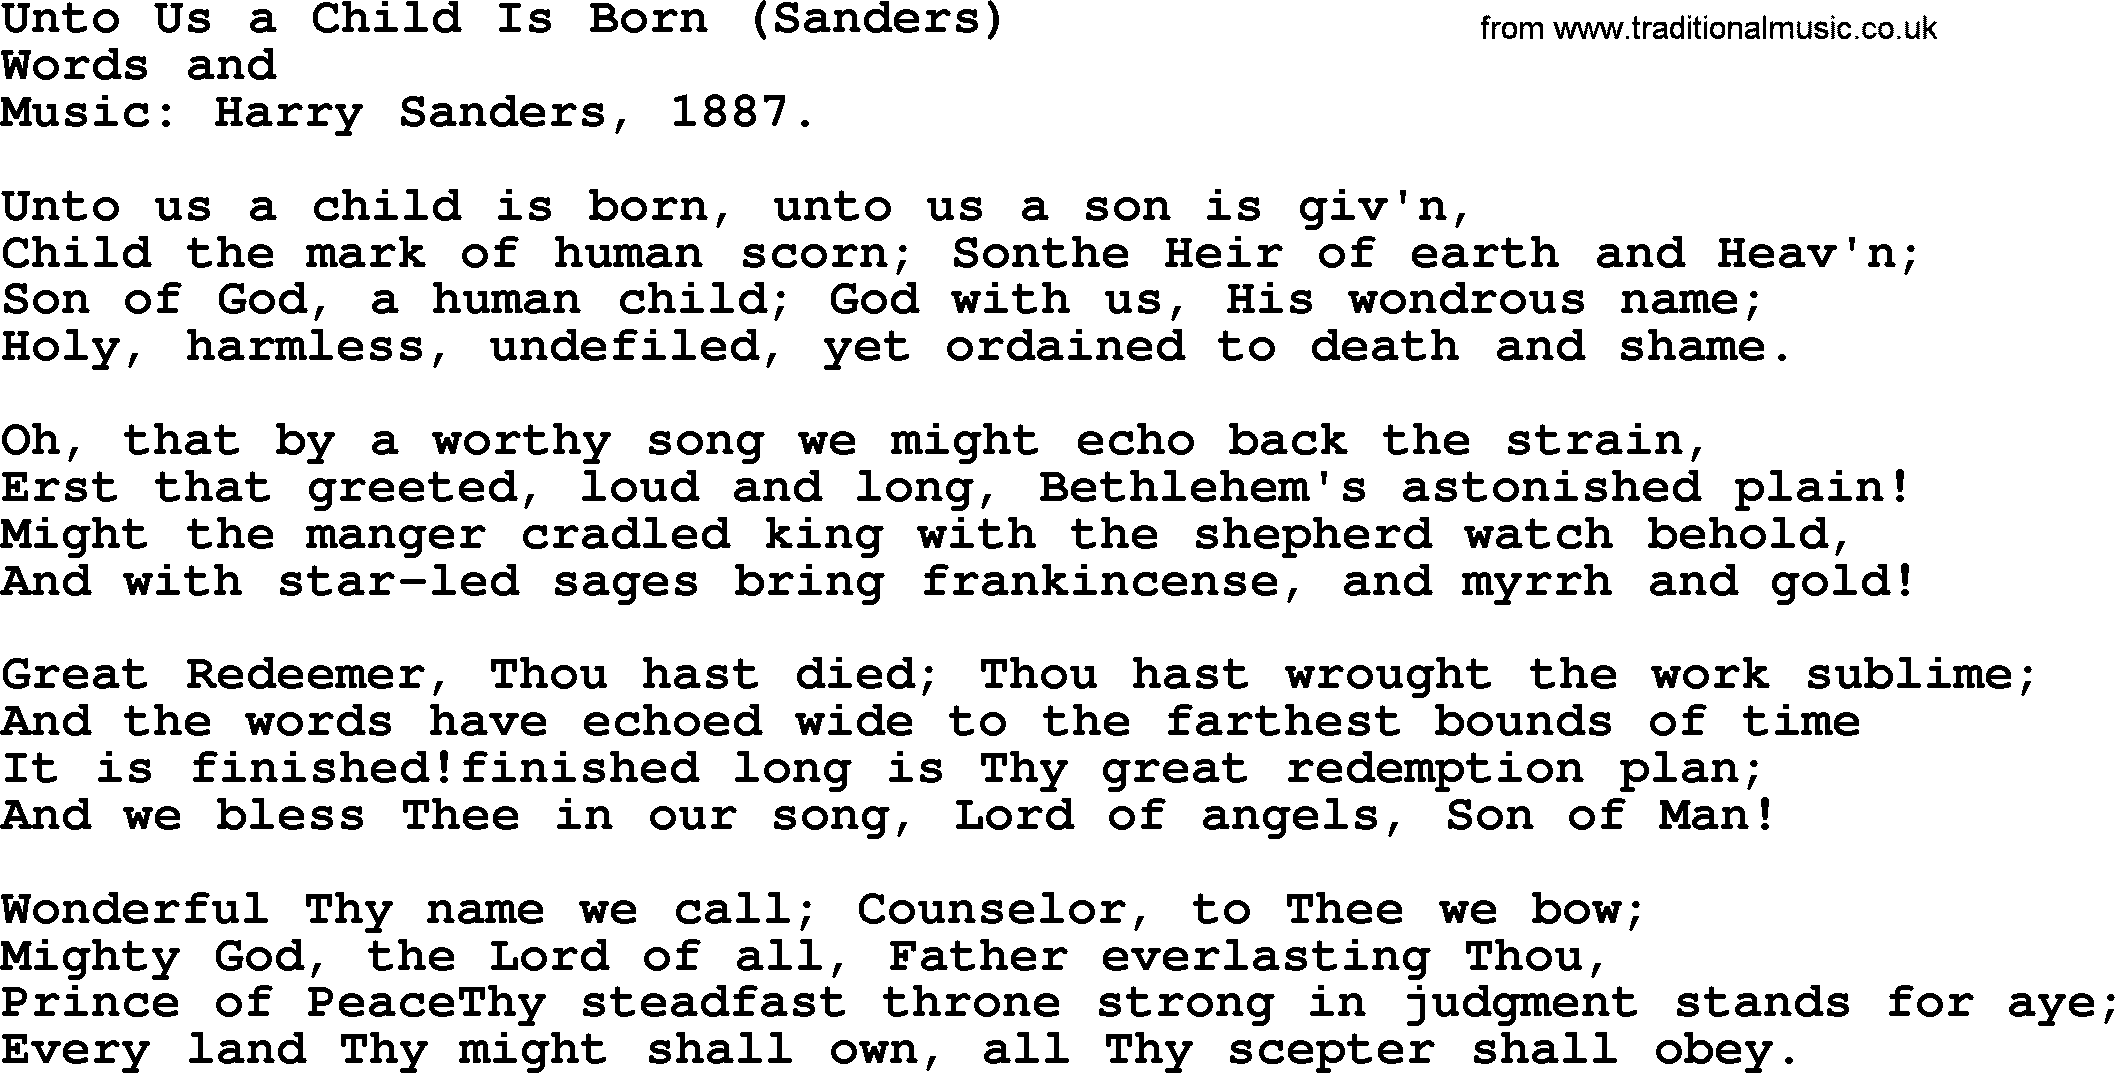 Christmas Hymns, Carols and Songs, title: Unto Us A Child Is Born (sanders), lyrics with PDF